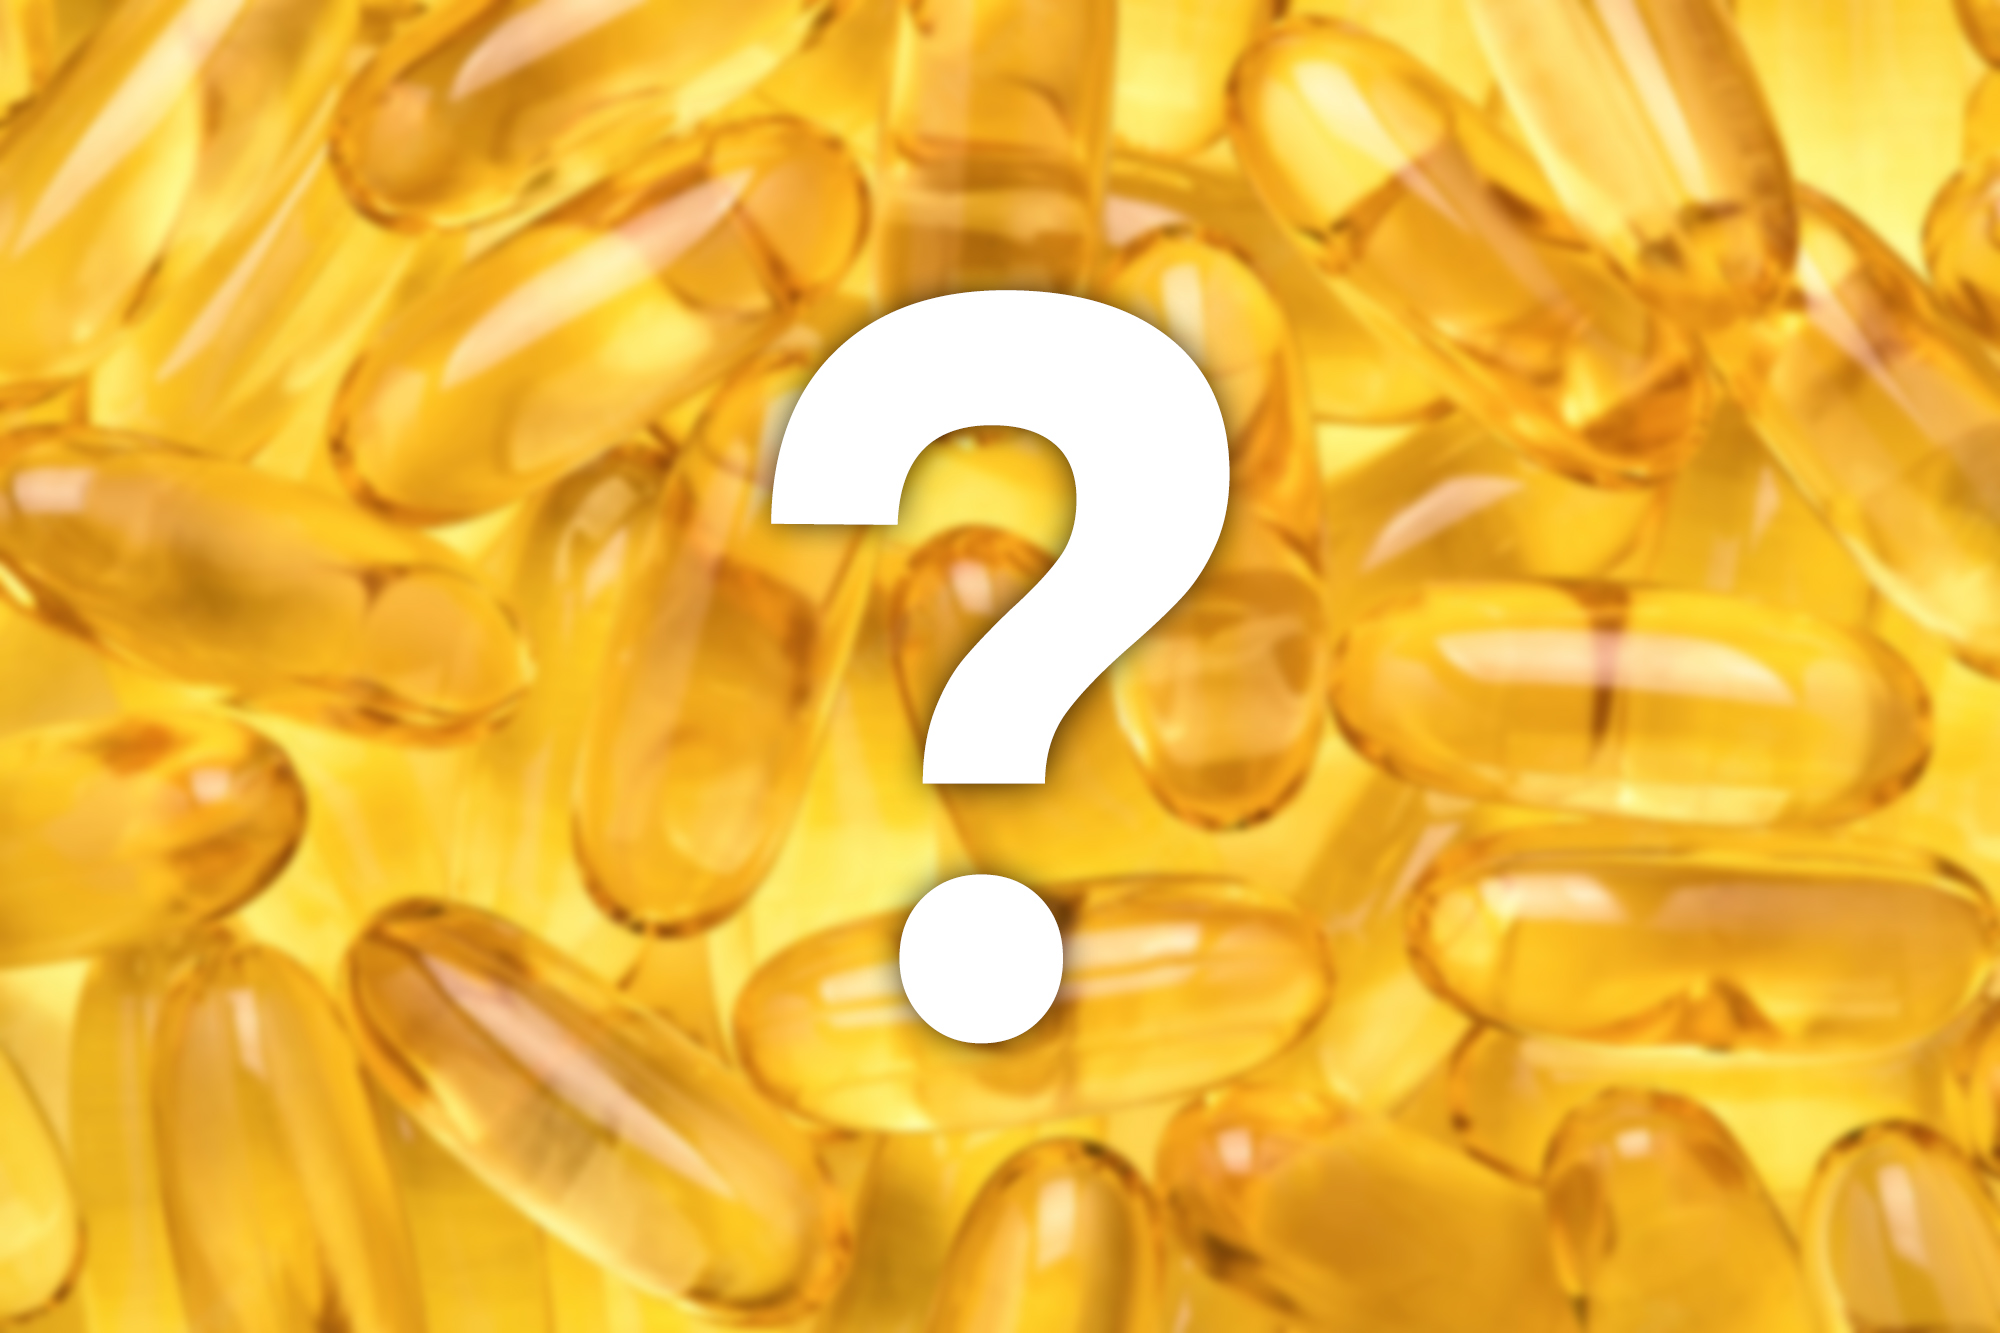 fish-oil-capsules-omega-3-softgels-yellow-background_255616-647-copy